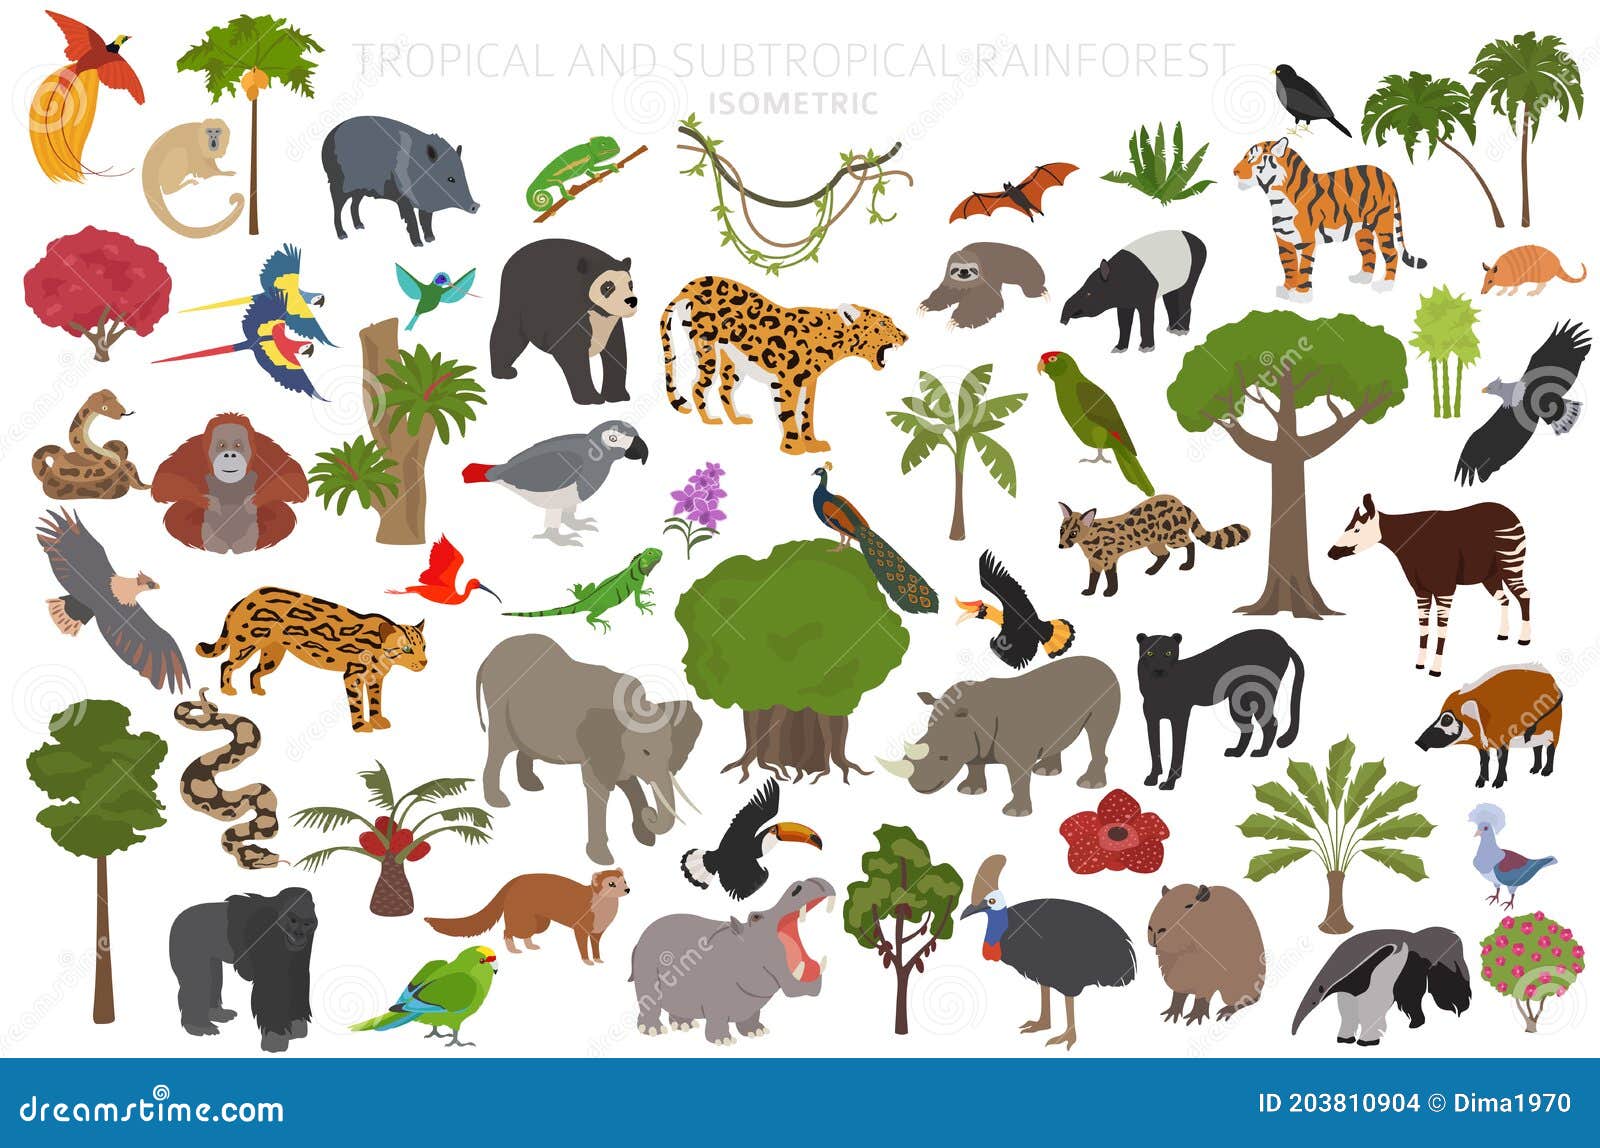 Tropical and Subtropical Rainforest Biome, Natural Region Infographic.  Amazonian, African, Asian, Australian Rainforests Stock Vector -  Illustration of genet, forest: 203810904